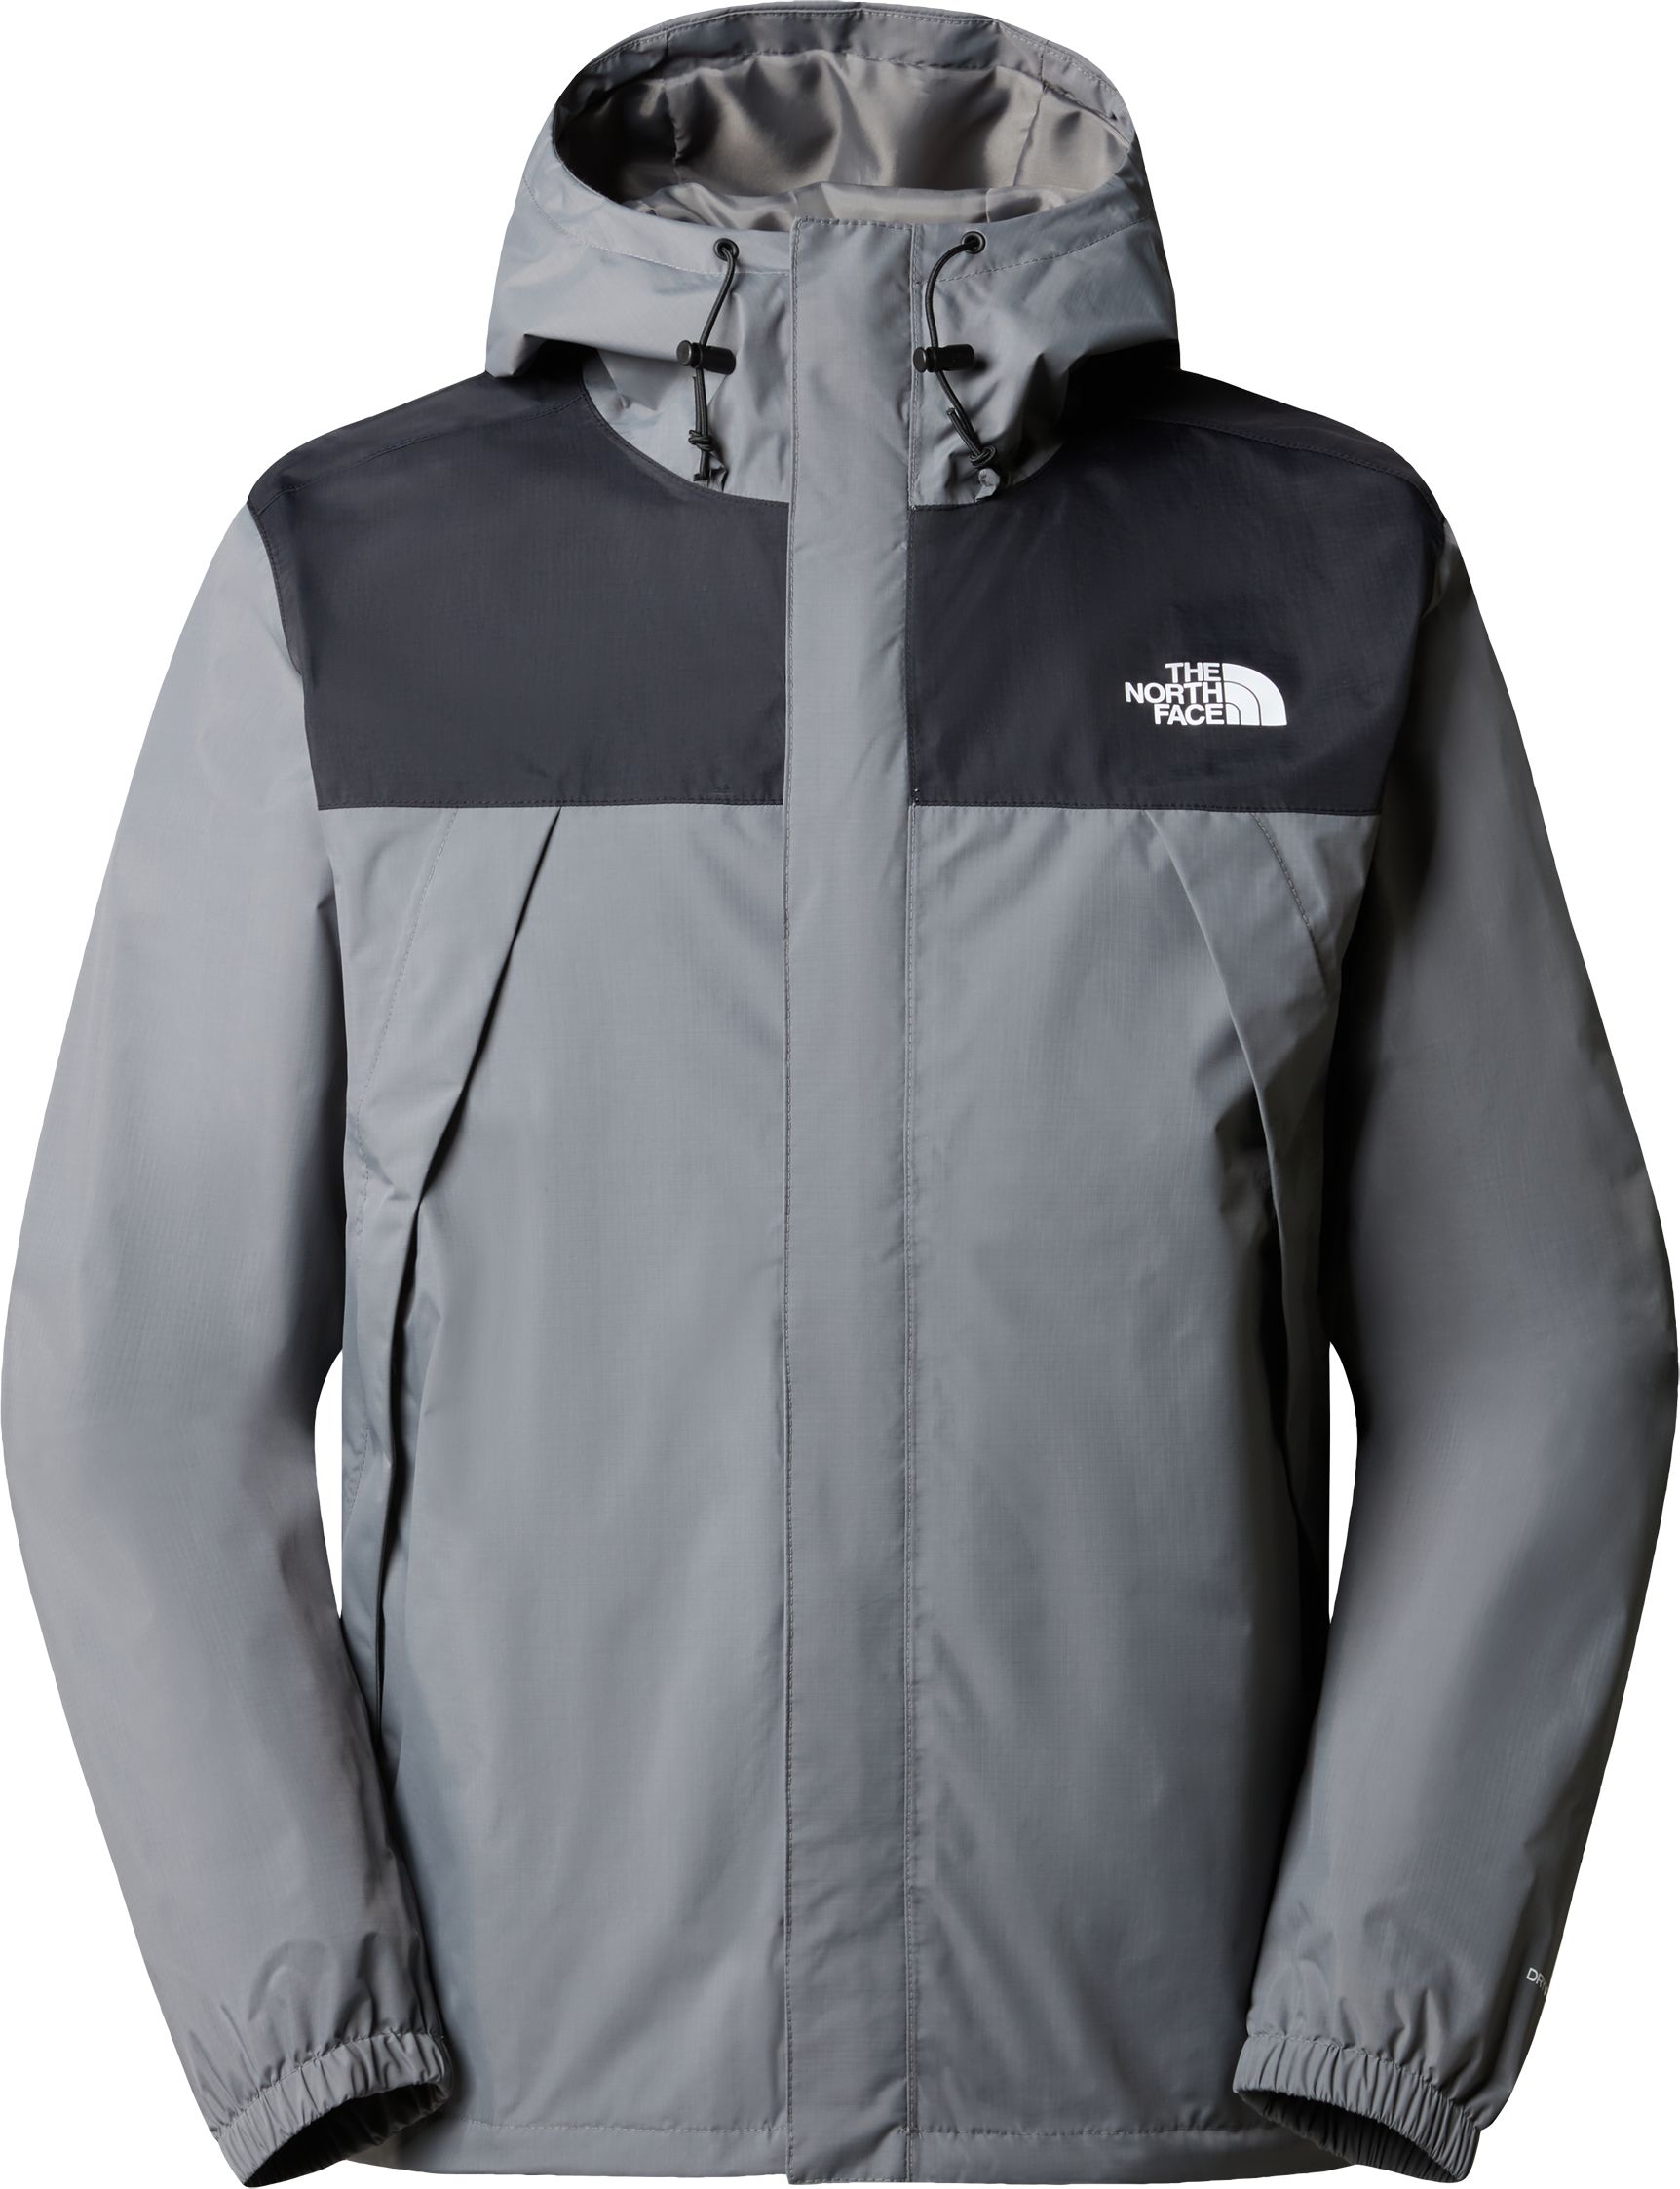 THE NORTH FACE, M ANTORA JACKET